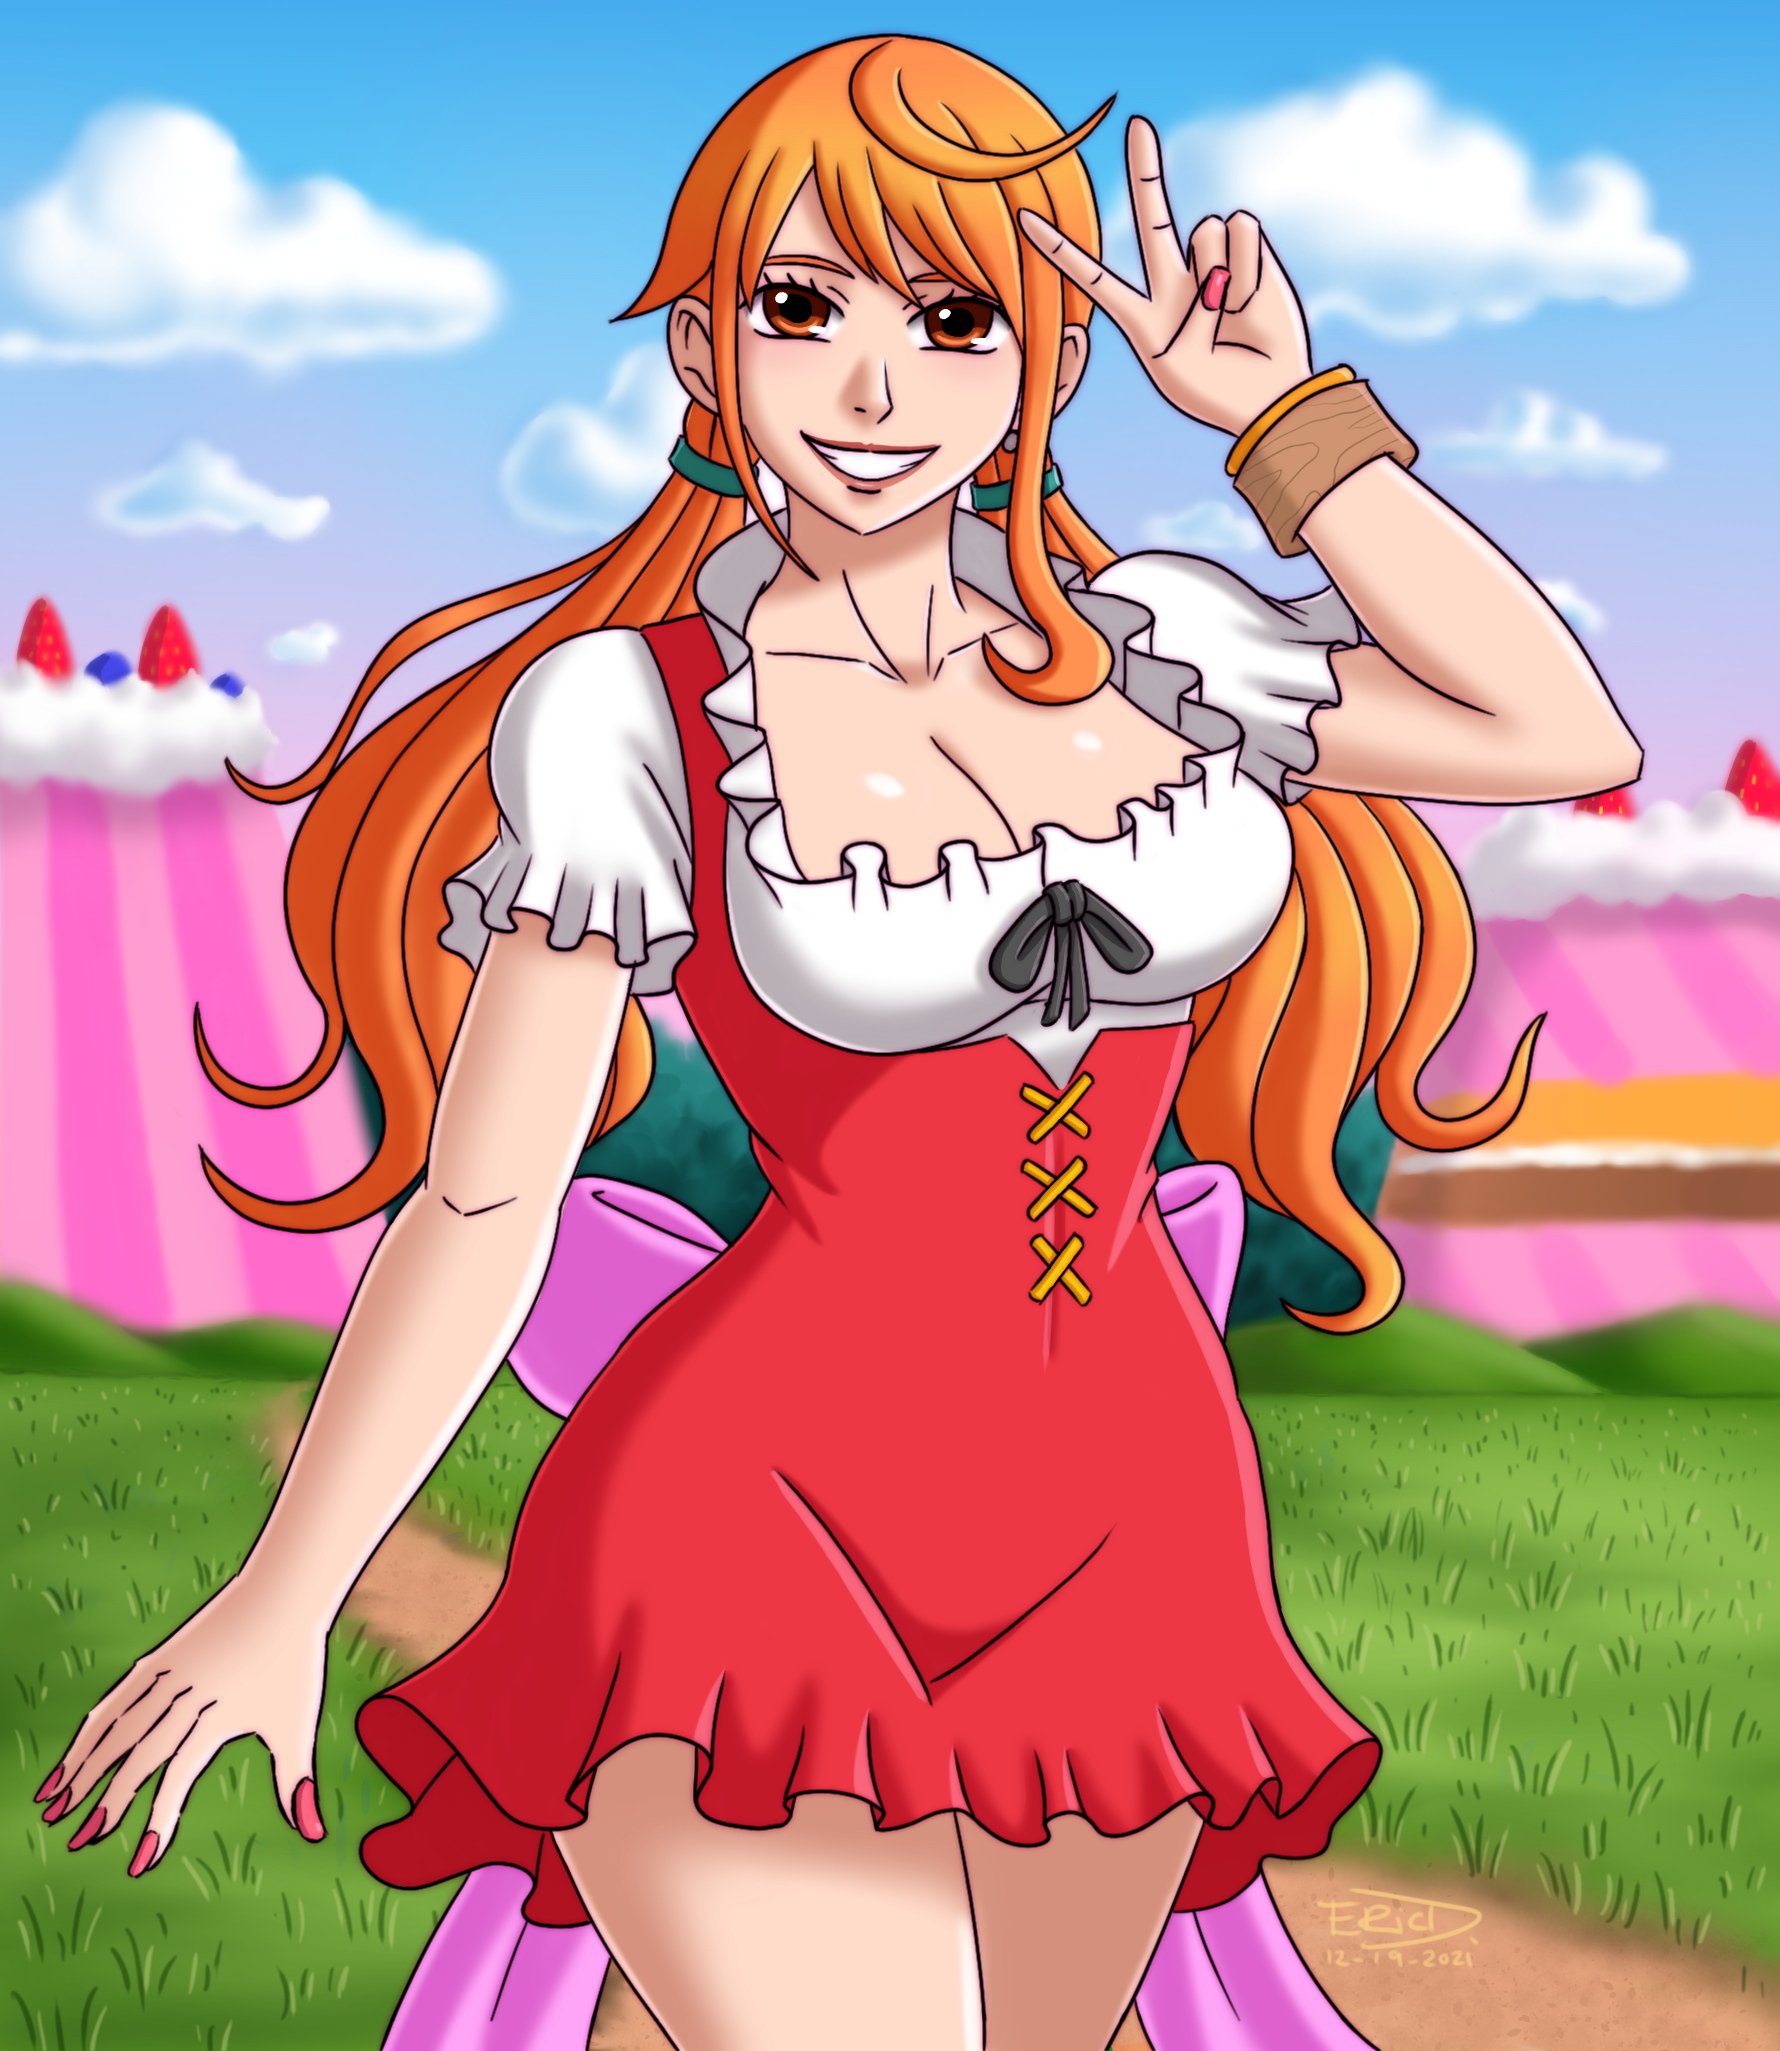 Nami Whole Cake Island Style By Xenonvincentlegend On Deviantart